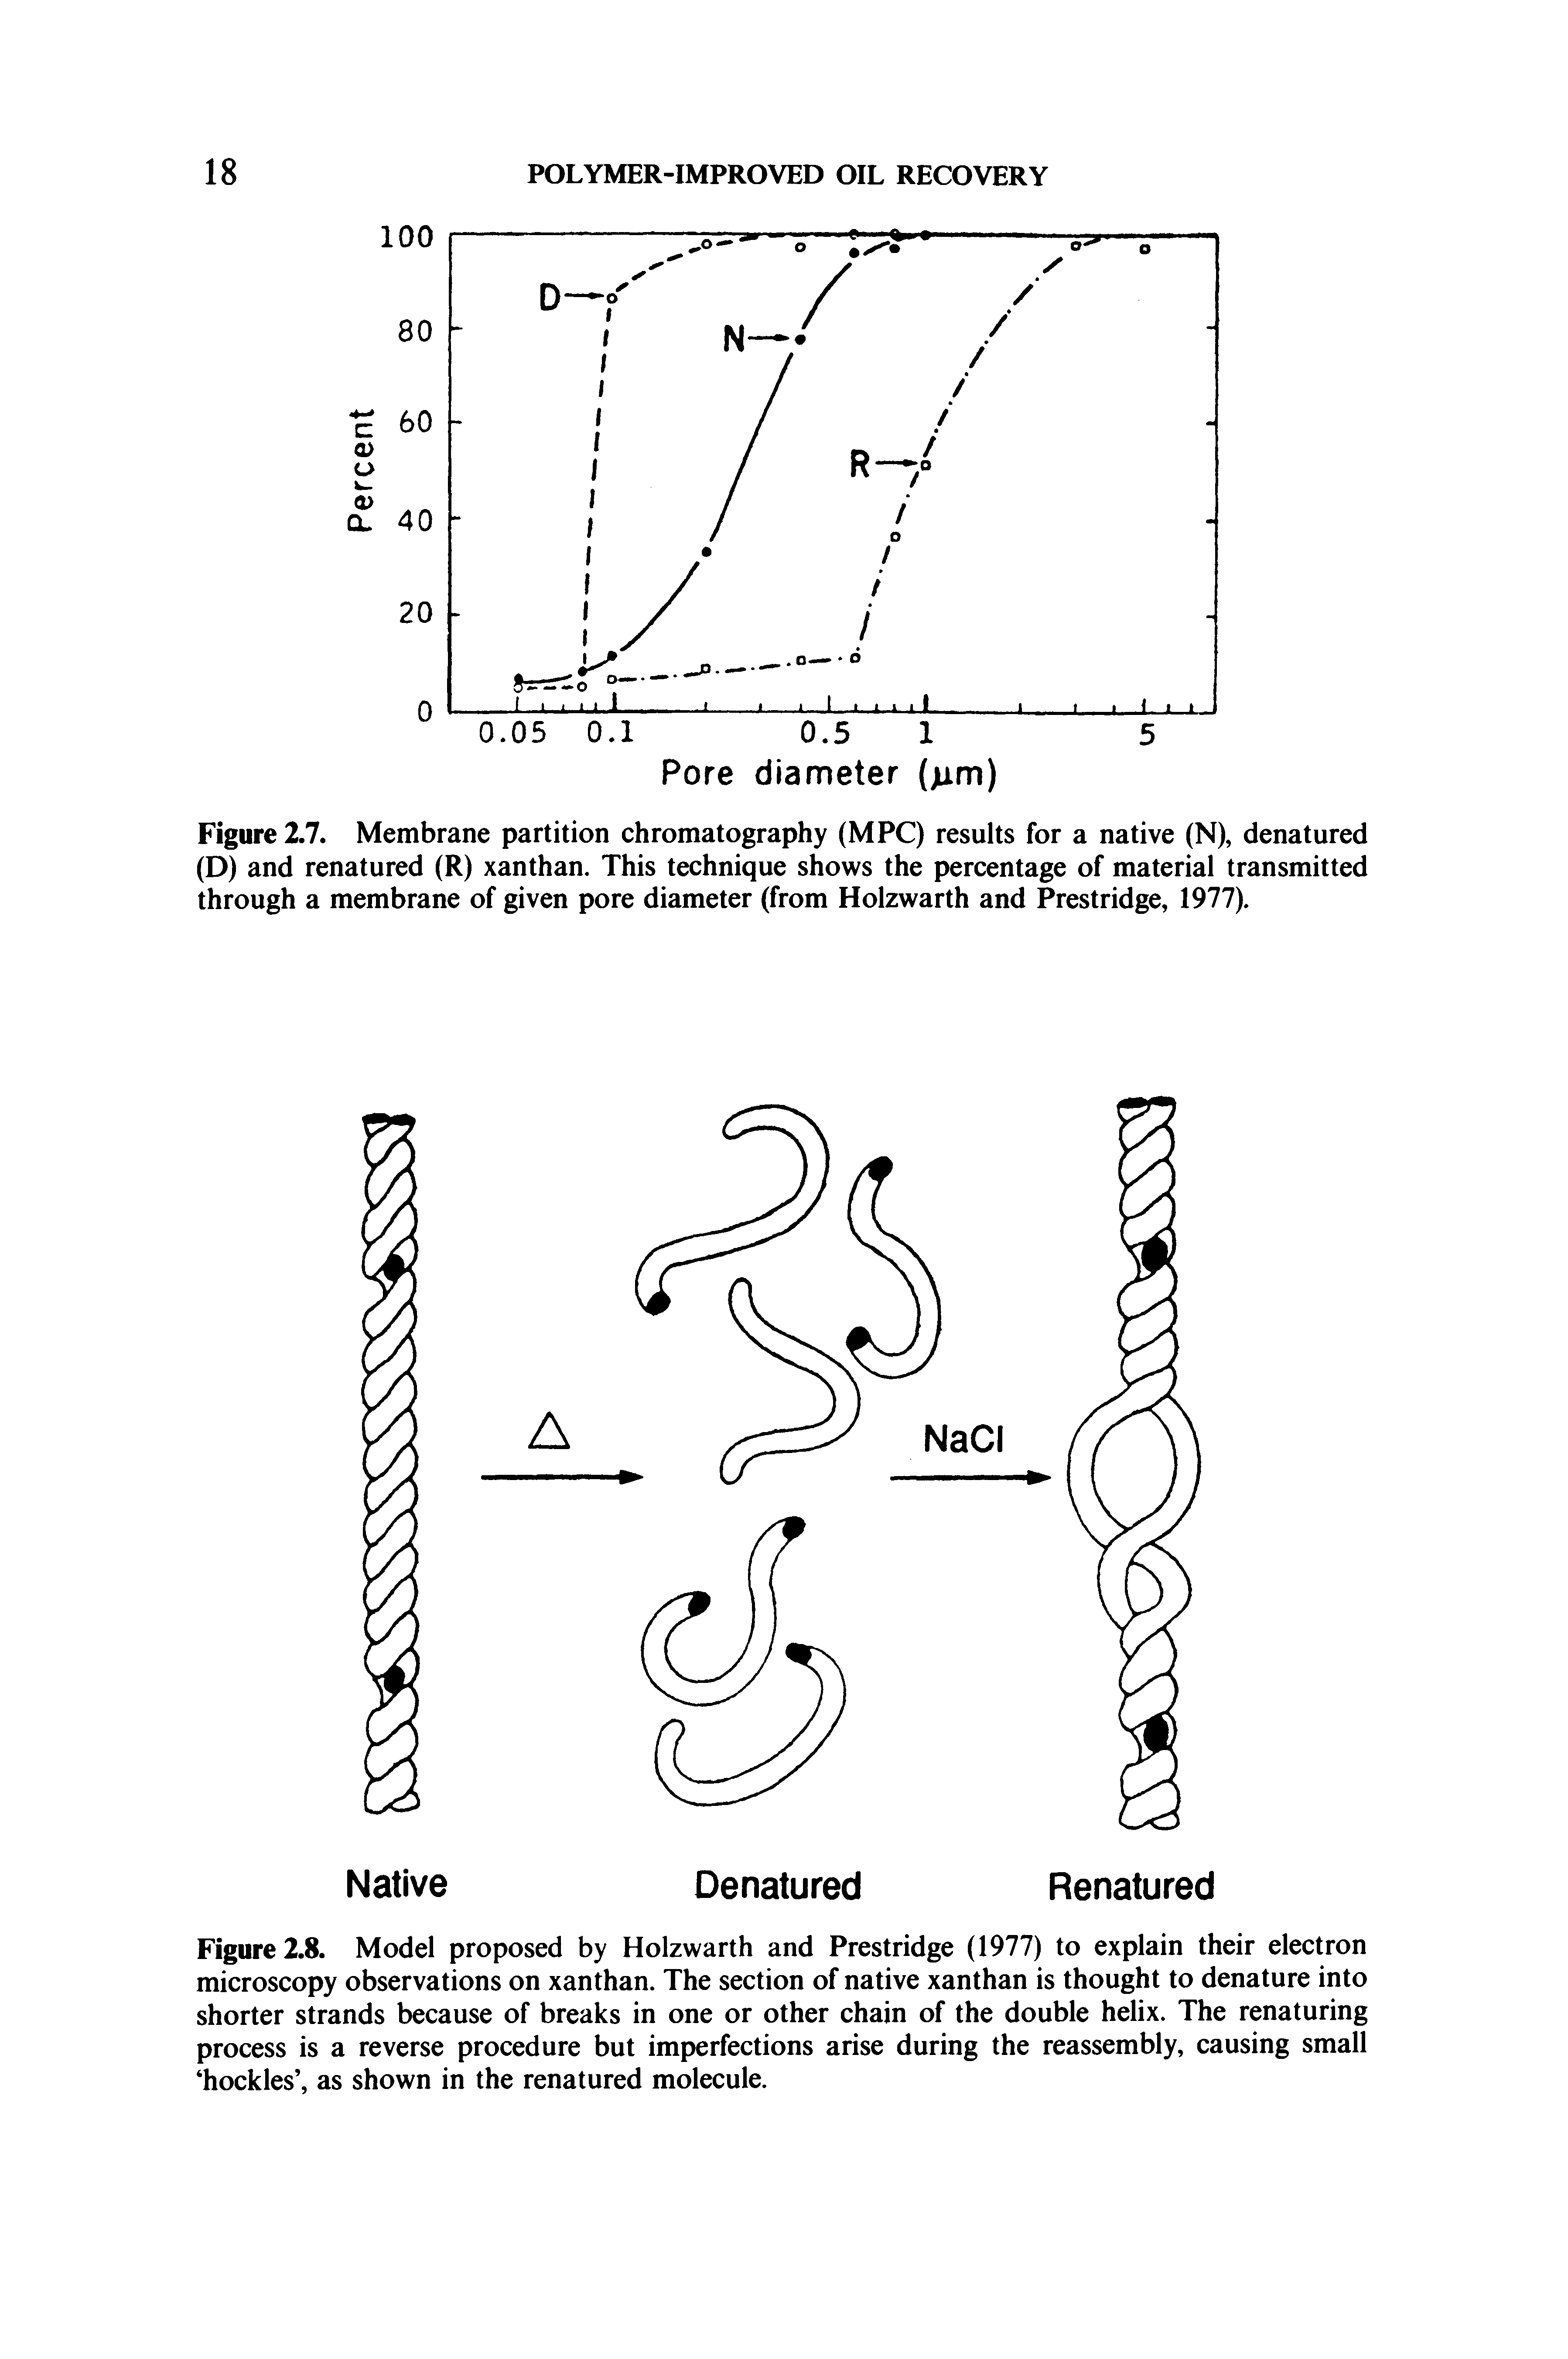 Figure 2.8. Model proposed by Holzwarth and Prestridge (1977) to explain their electron microscopy observations on xanthan. The section of native xanthan is thought to denature into shorter strands because of breaks in one or other chain of the double helix. The renaturing process is a reverse procedure but imperfections arise during the reassembly, causing small hockles , as shown in the renatured molecule.